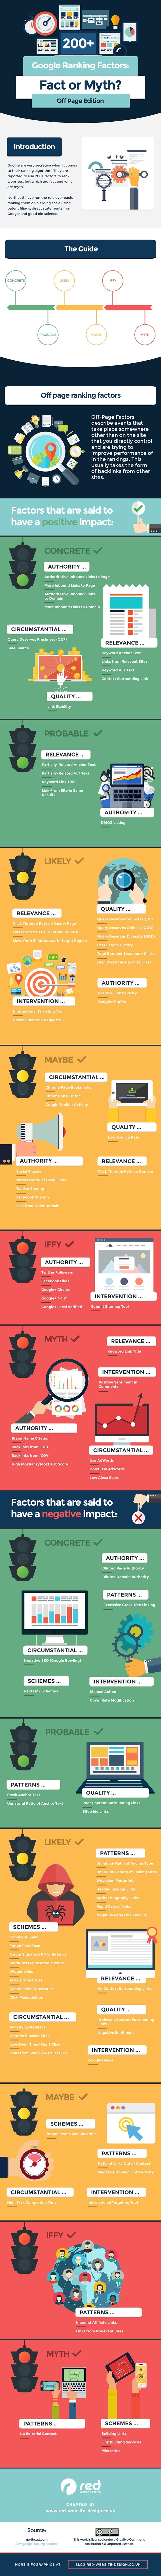 Off-Page-SEO-Ranking-Factors-True-or-False-Infographic-compressed.jpg